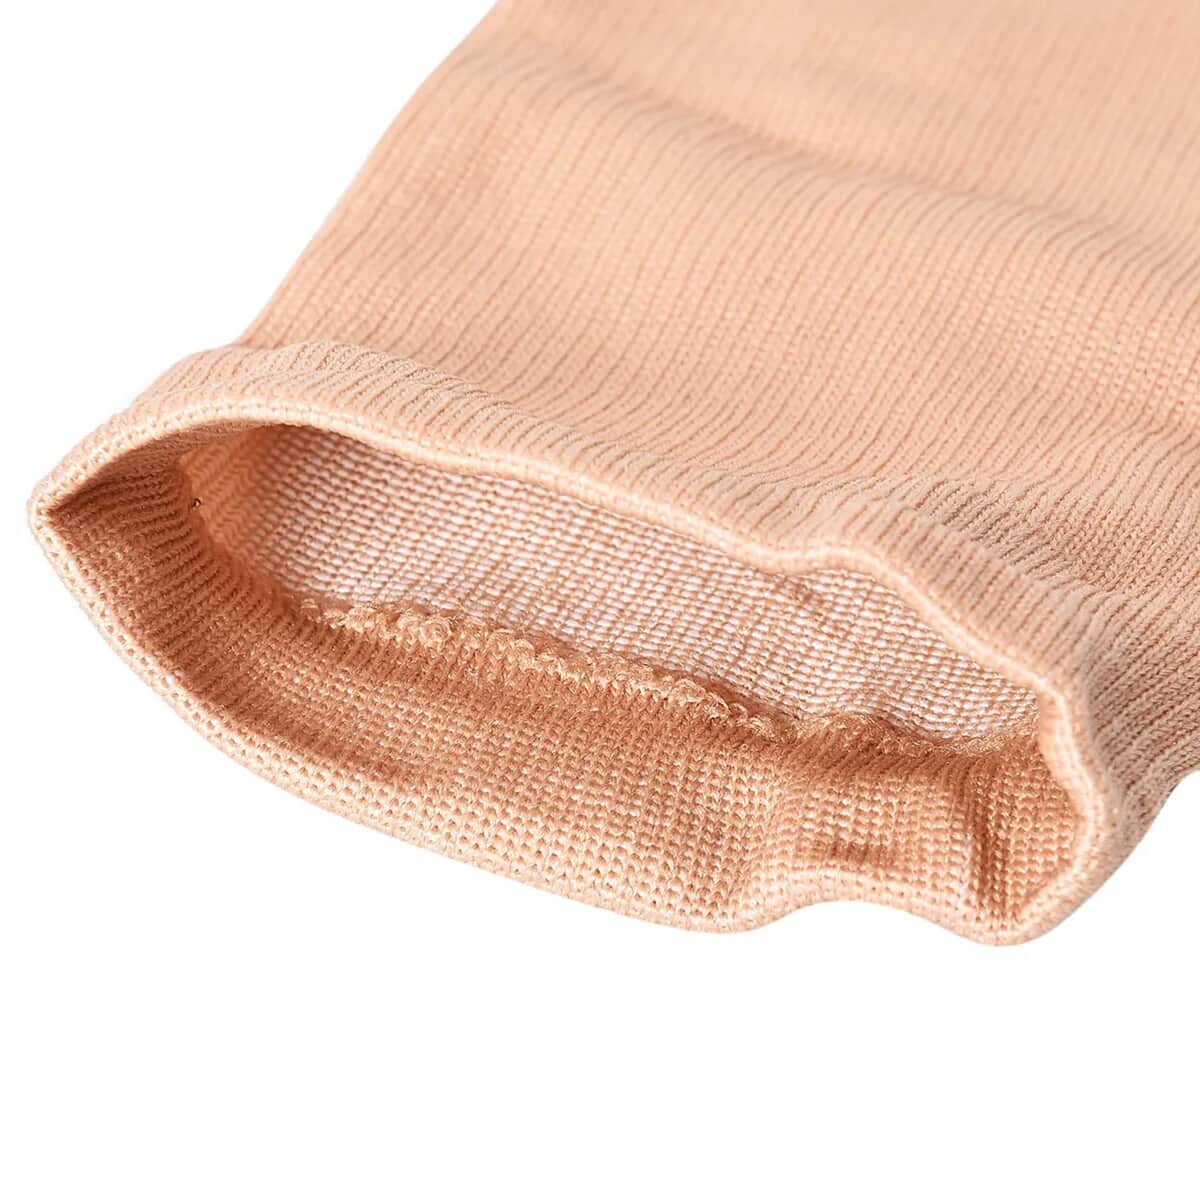 Beige 5% Copper and 70% Polyester and 25% Elastane Set of 2 Pairs Socks (L/XL) image number 5